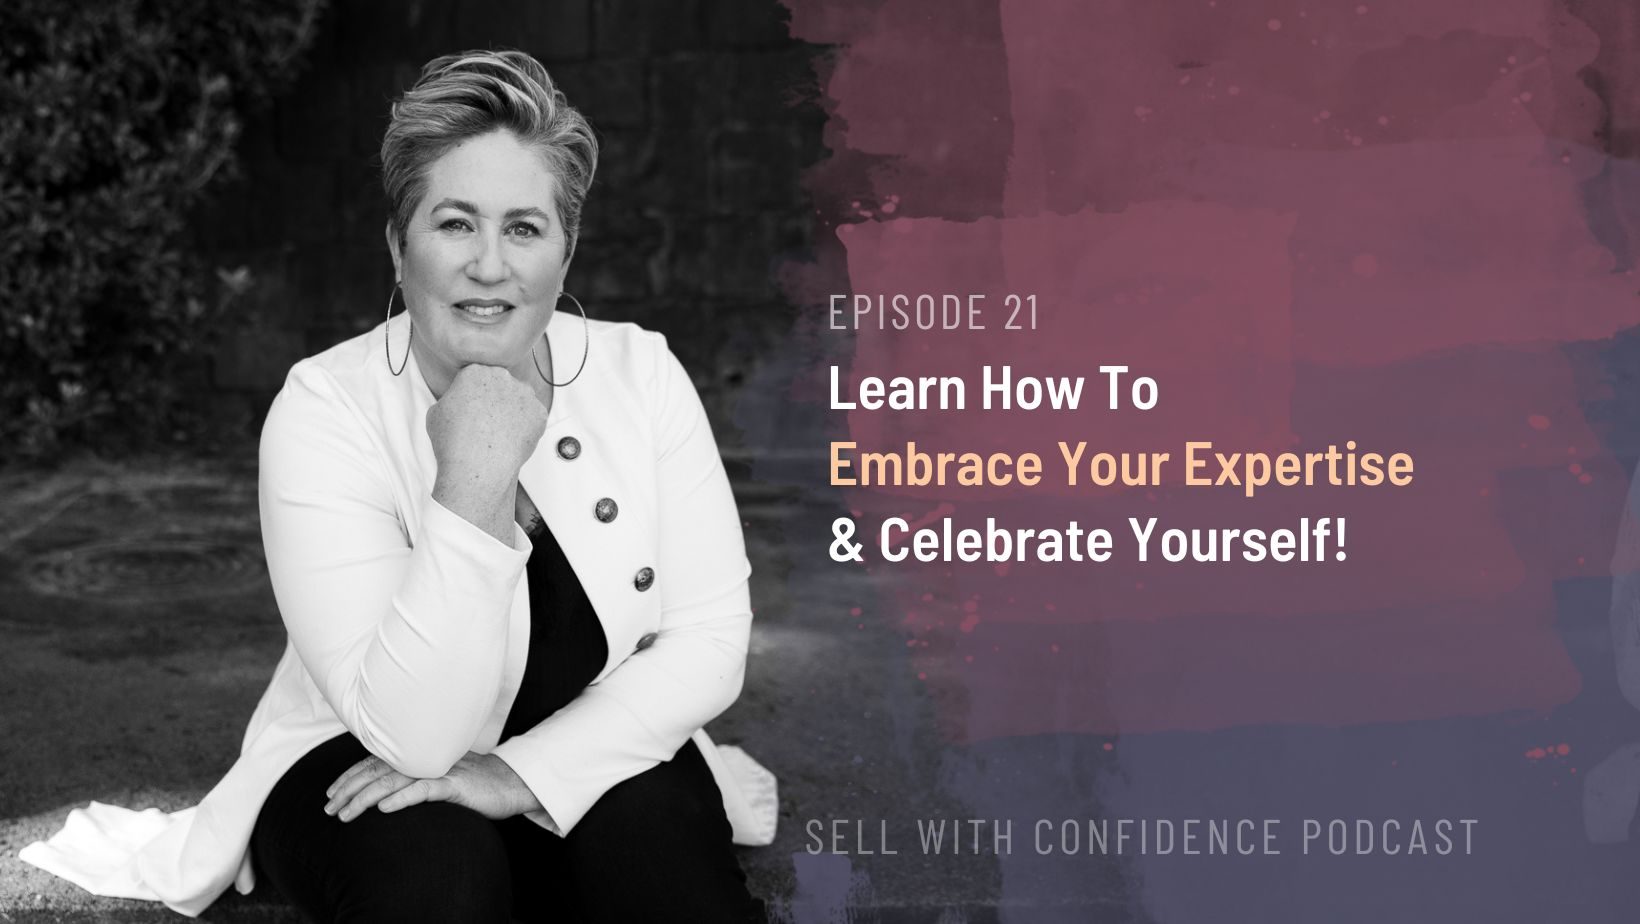 Learn How To Embrace Your Expertise And Celebrate The Shit Out of Yourself!